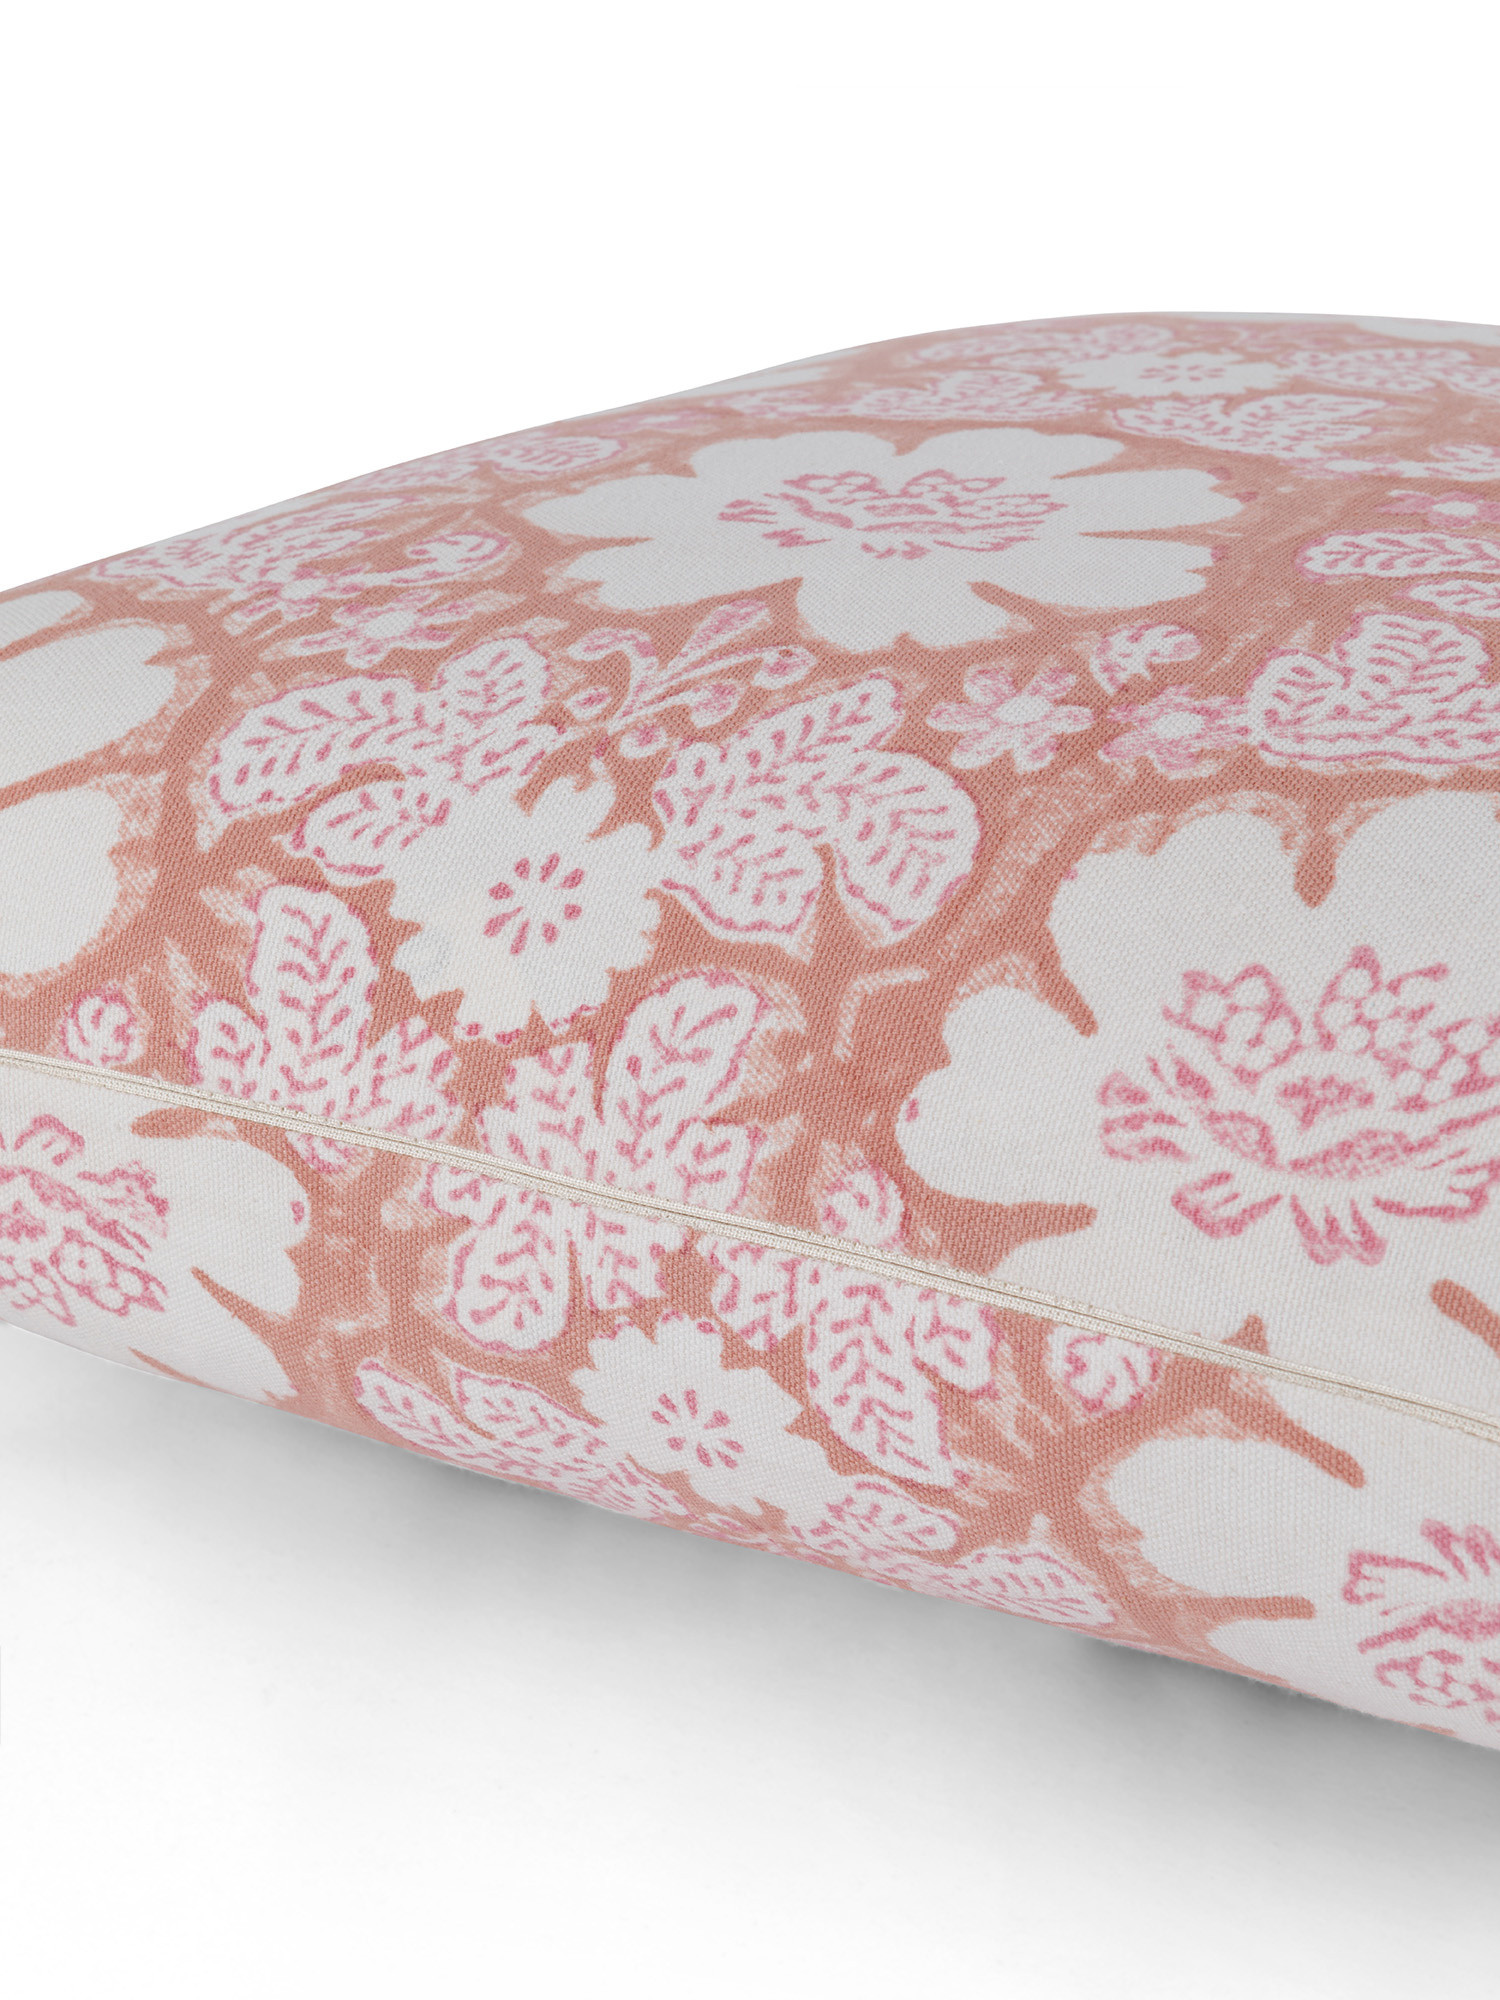 Cushion with flower print 45x45 cm, Pink, large image number 2